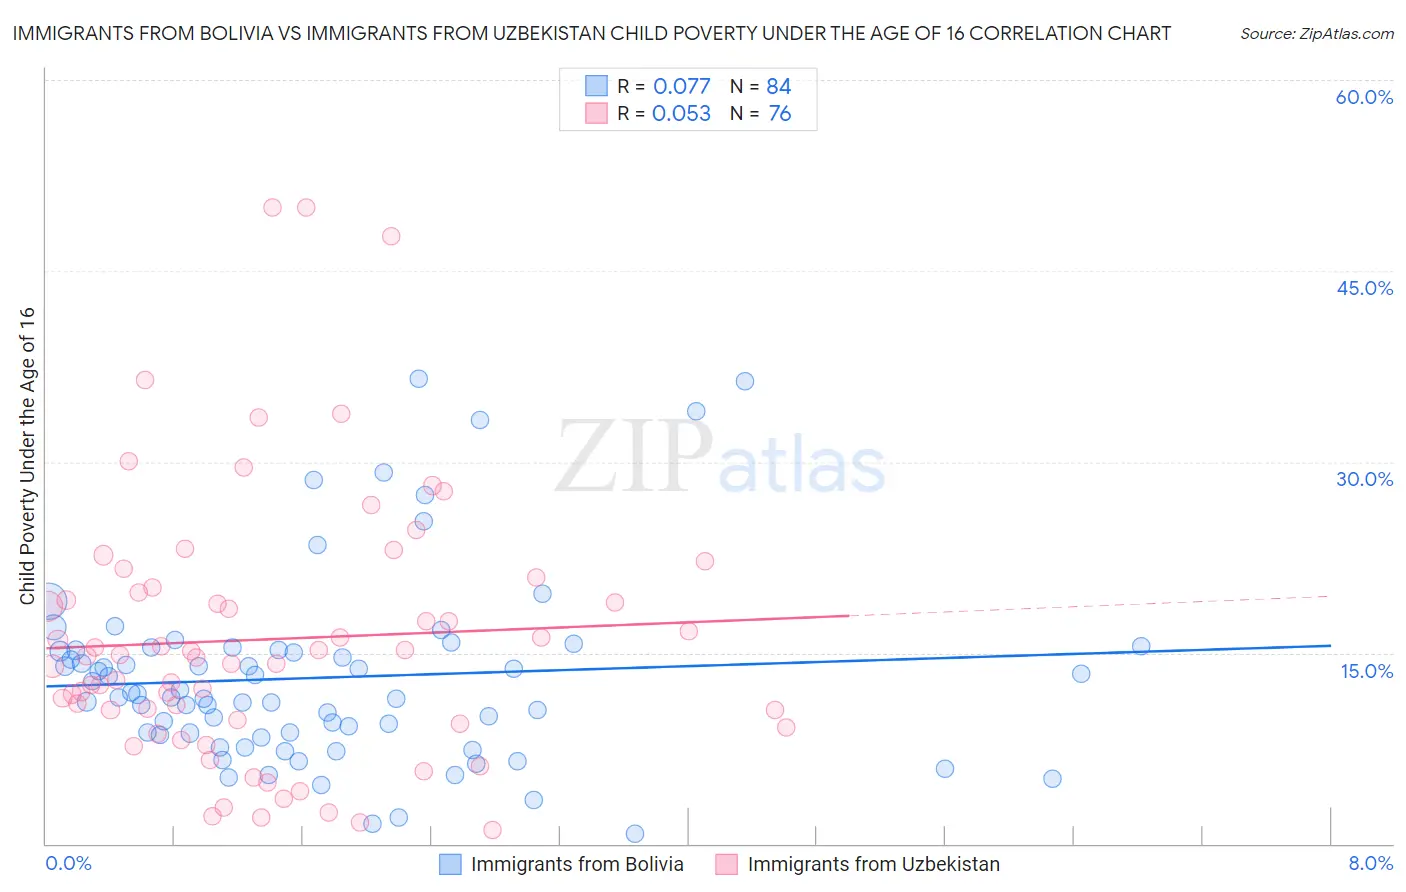 Immigrants from Bolivia vs Immigrants from Uzbekistan Child Poverty Under the Age of 16